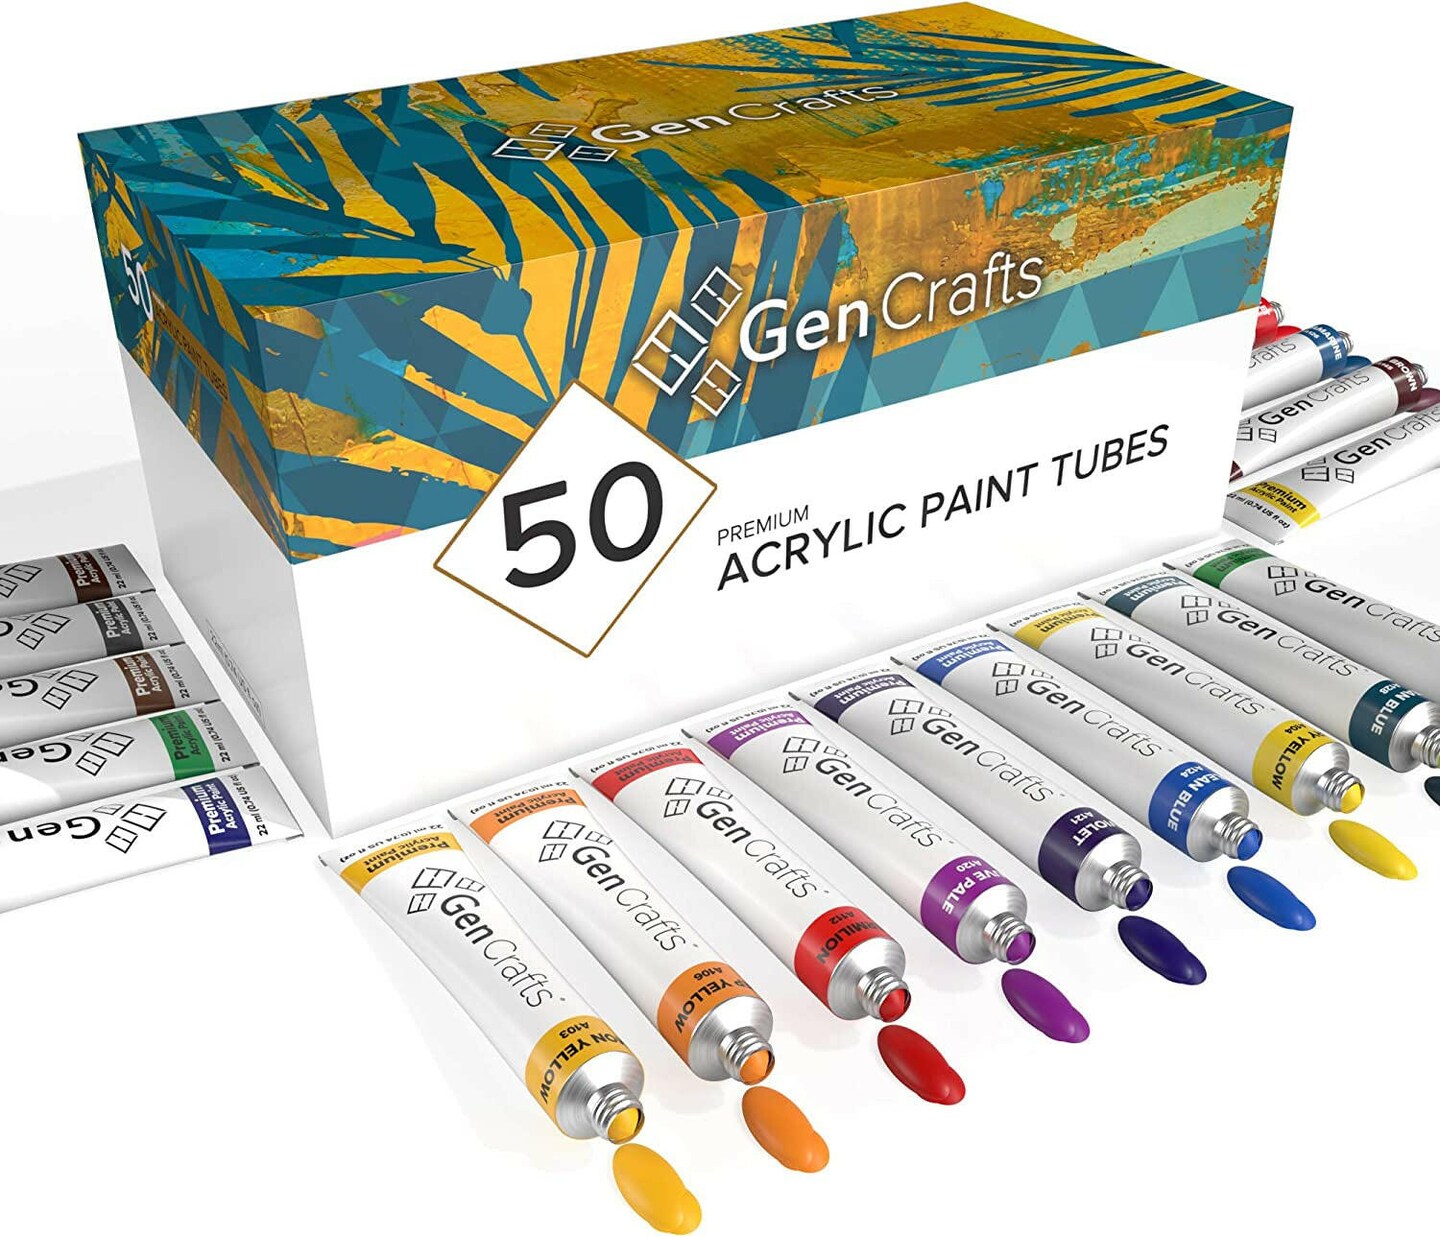 Acrylic Paint - Set of 50 Premium Vibrant Colors - Quality Non Toxic  Pigment Paints for Canvas, Paper, Wood, Crafts, and More